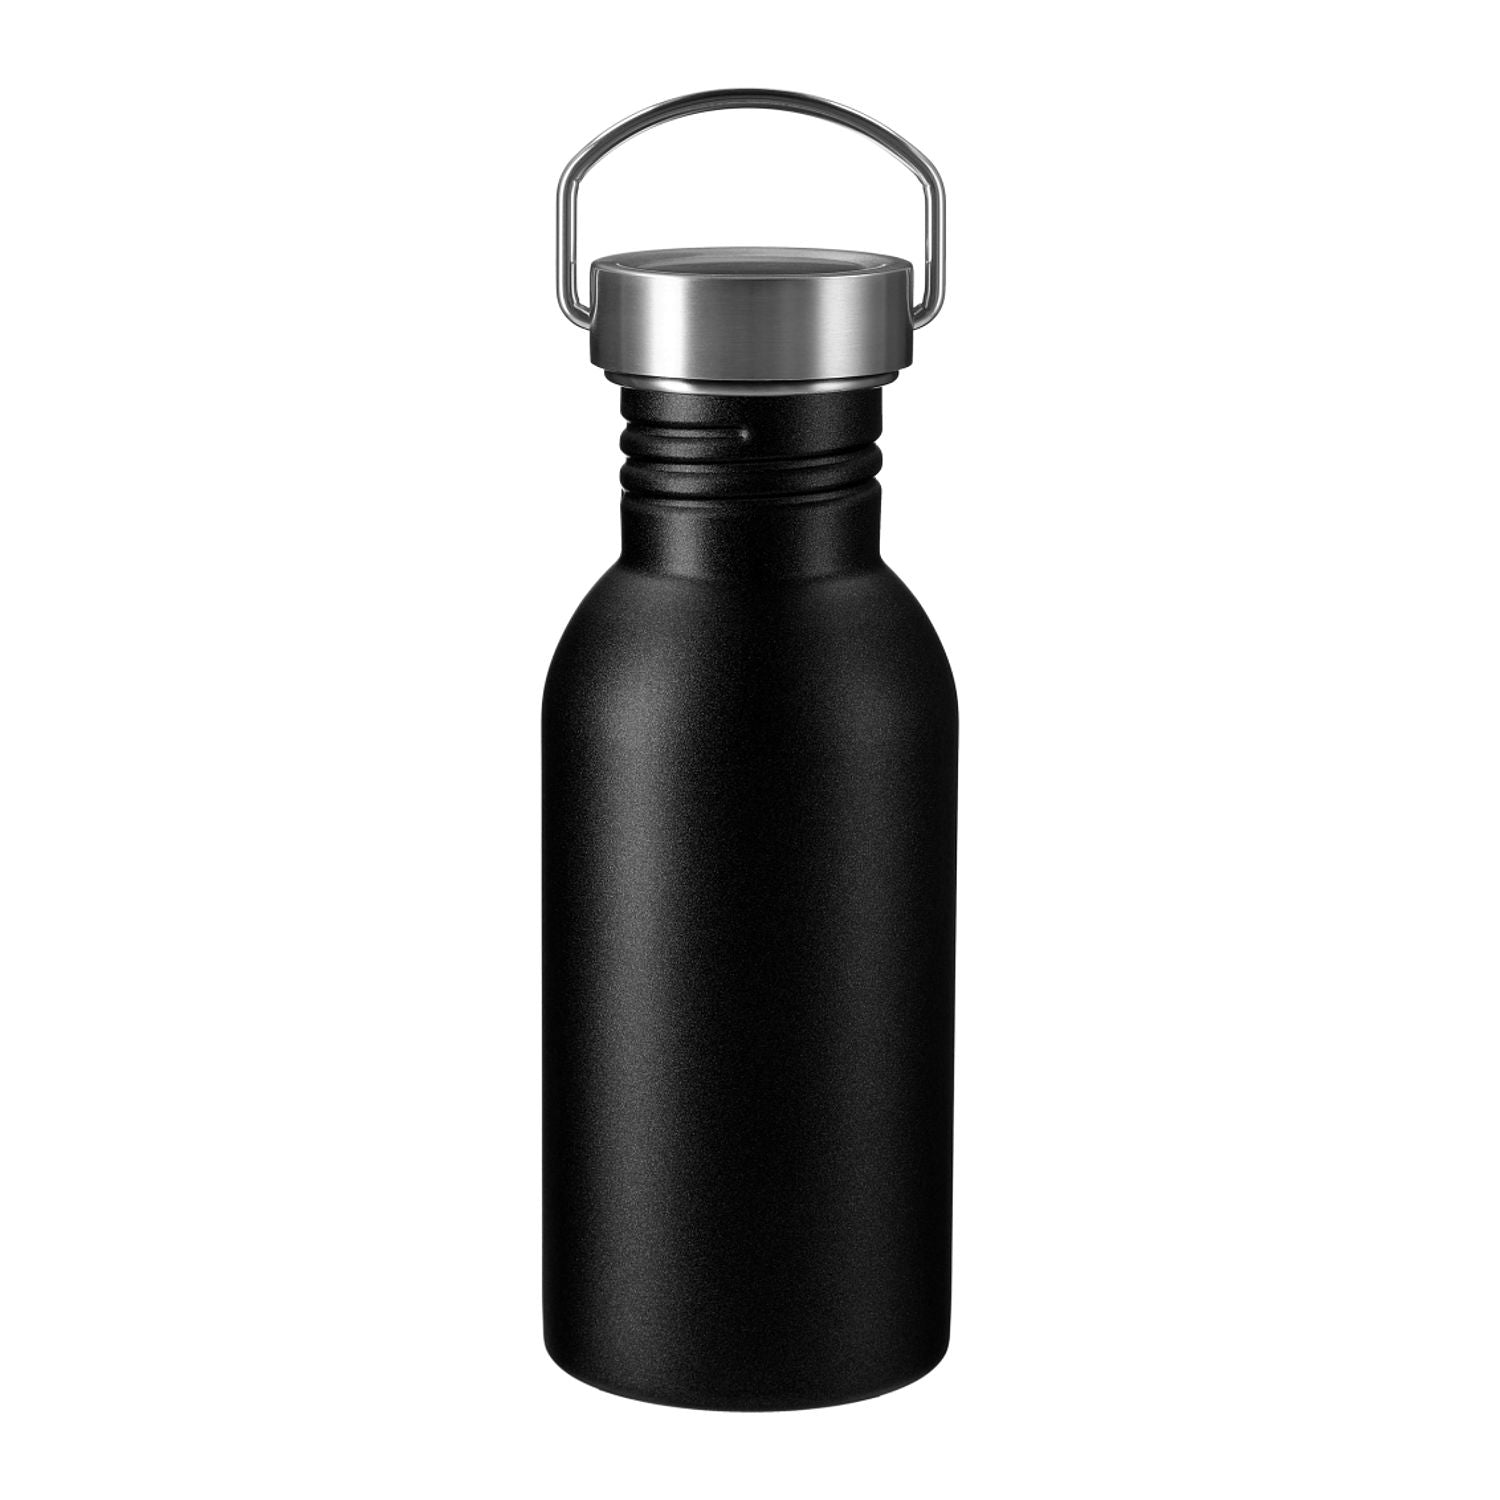 Thor 20 oz Stainless Steel Single-Walled Sports Bottle in black